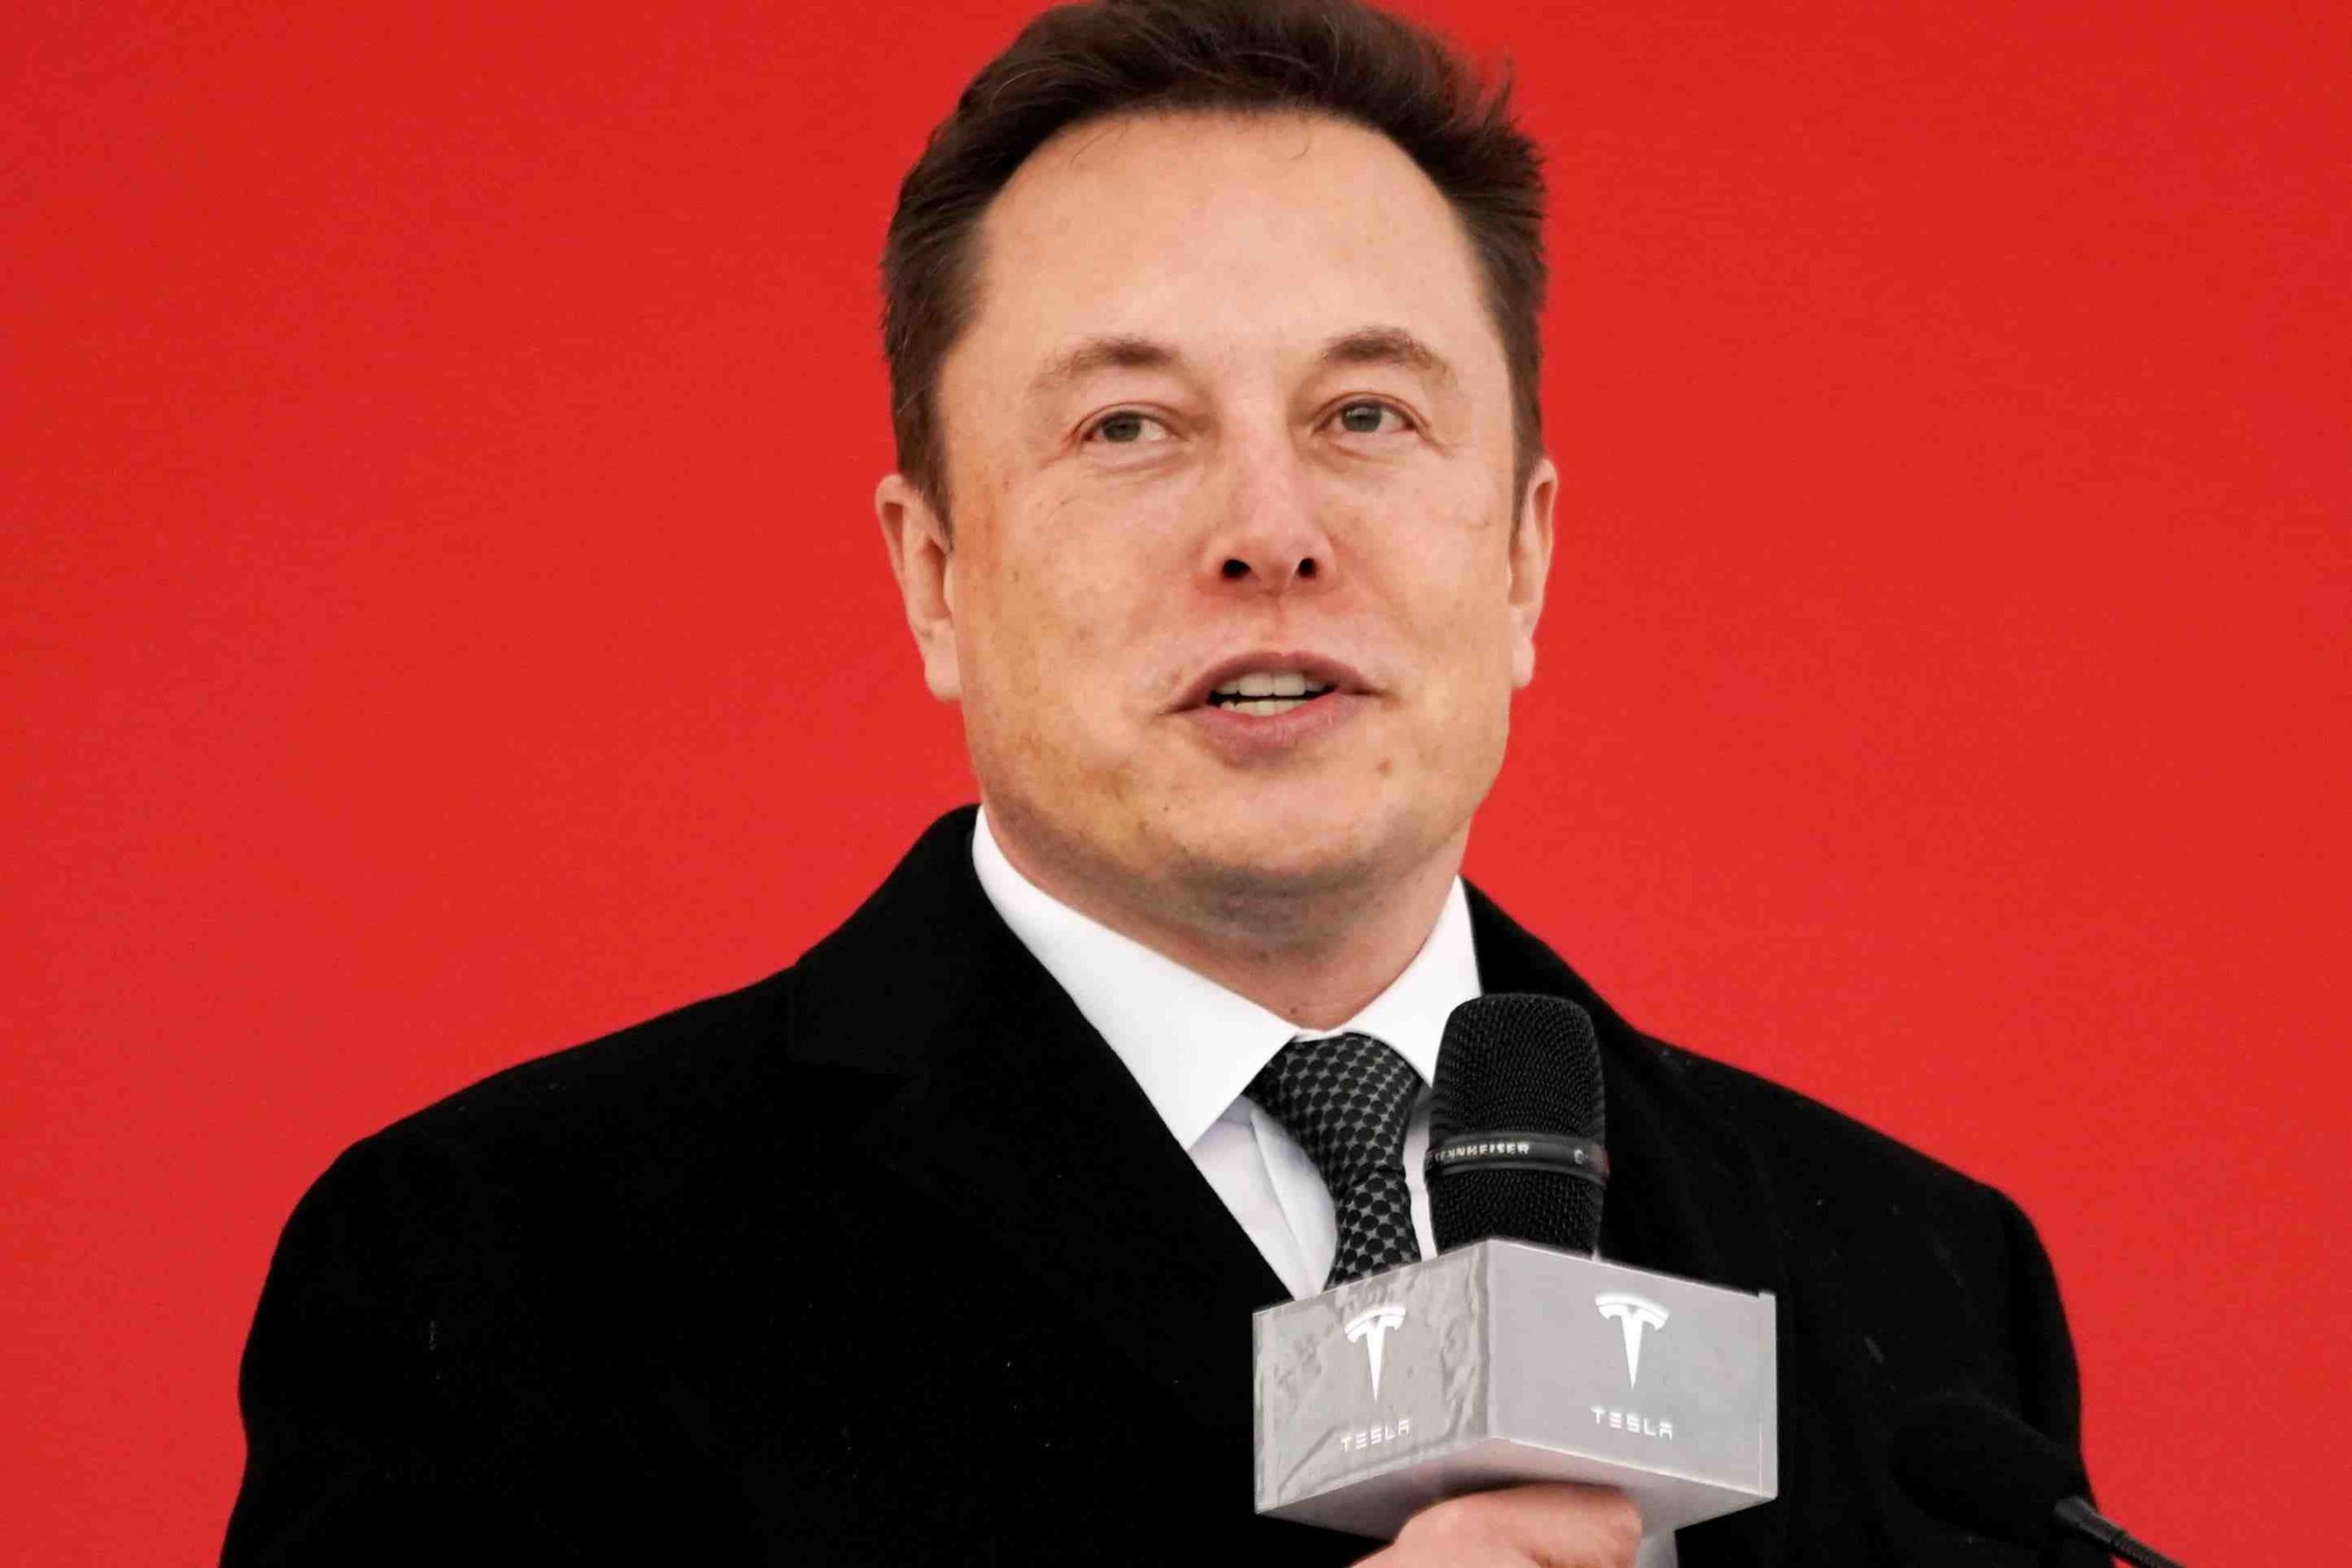 How much of SpaceX is owned by Elon Musk?